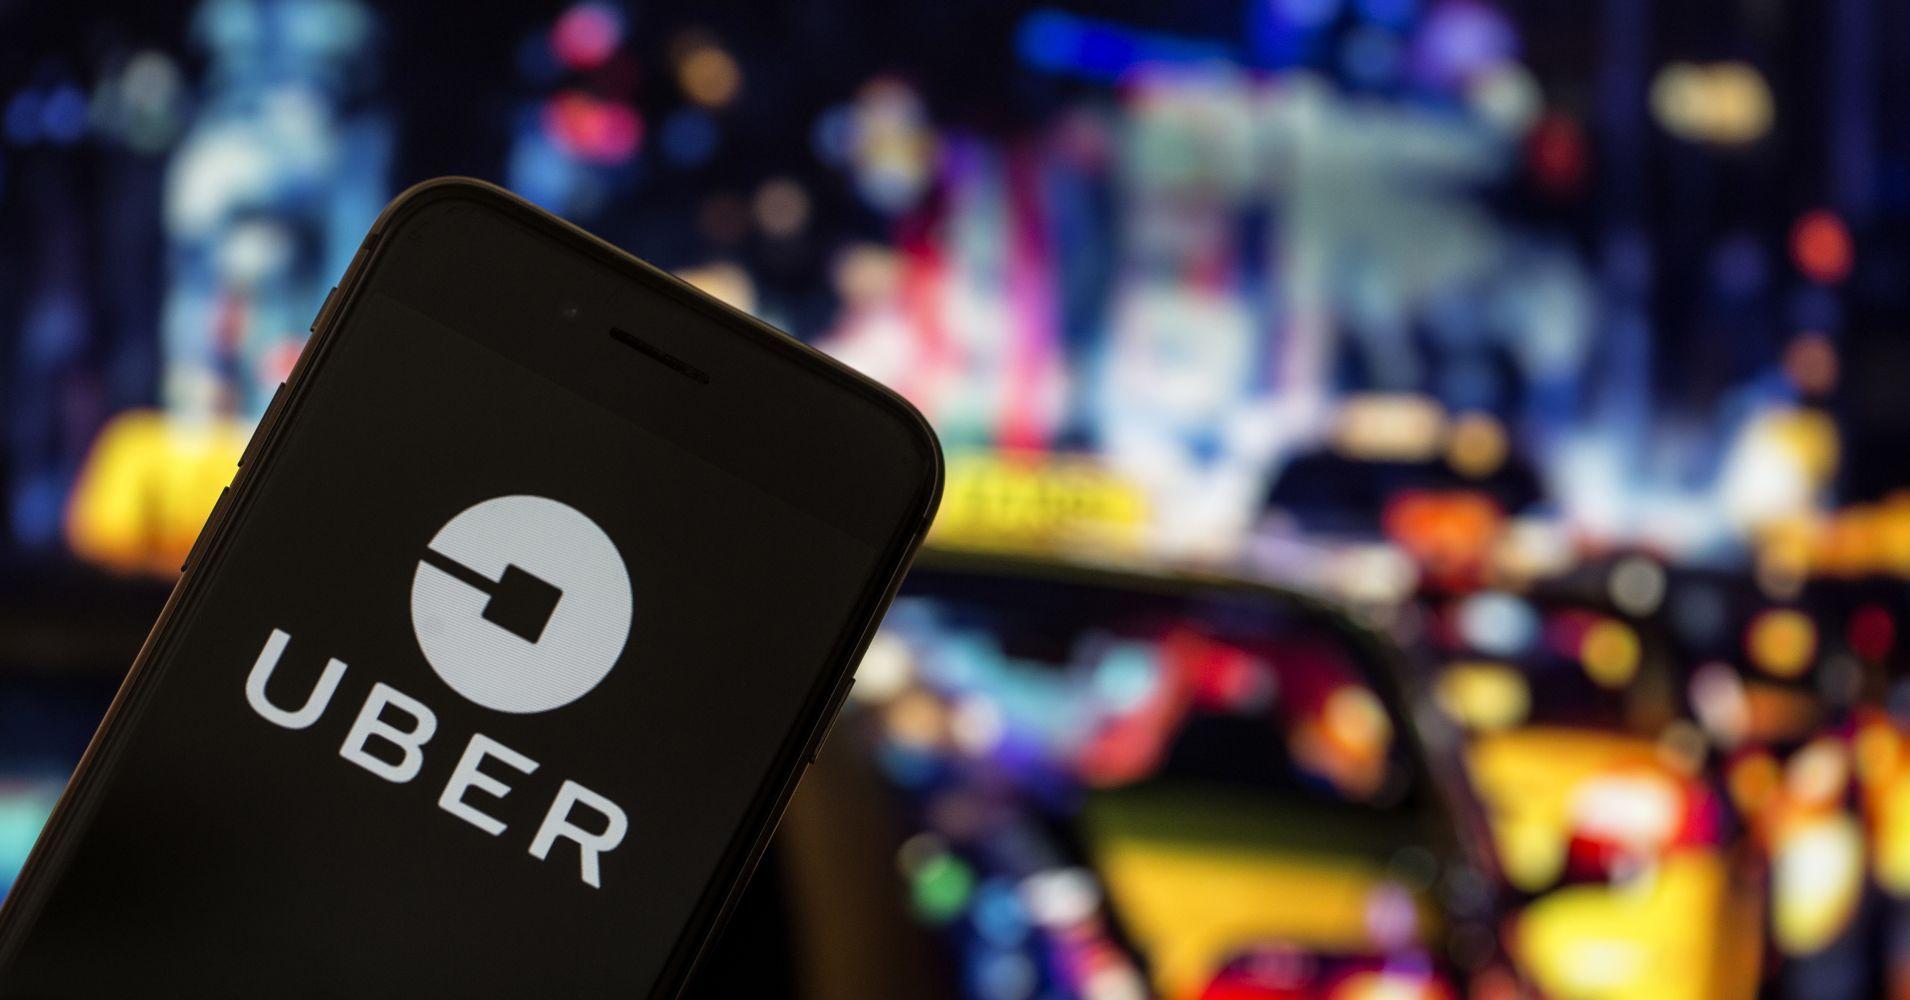 Uber Large Logo - Uber submits IPO paperwork, rages against Lyft for a large offer ...